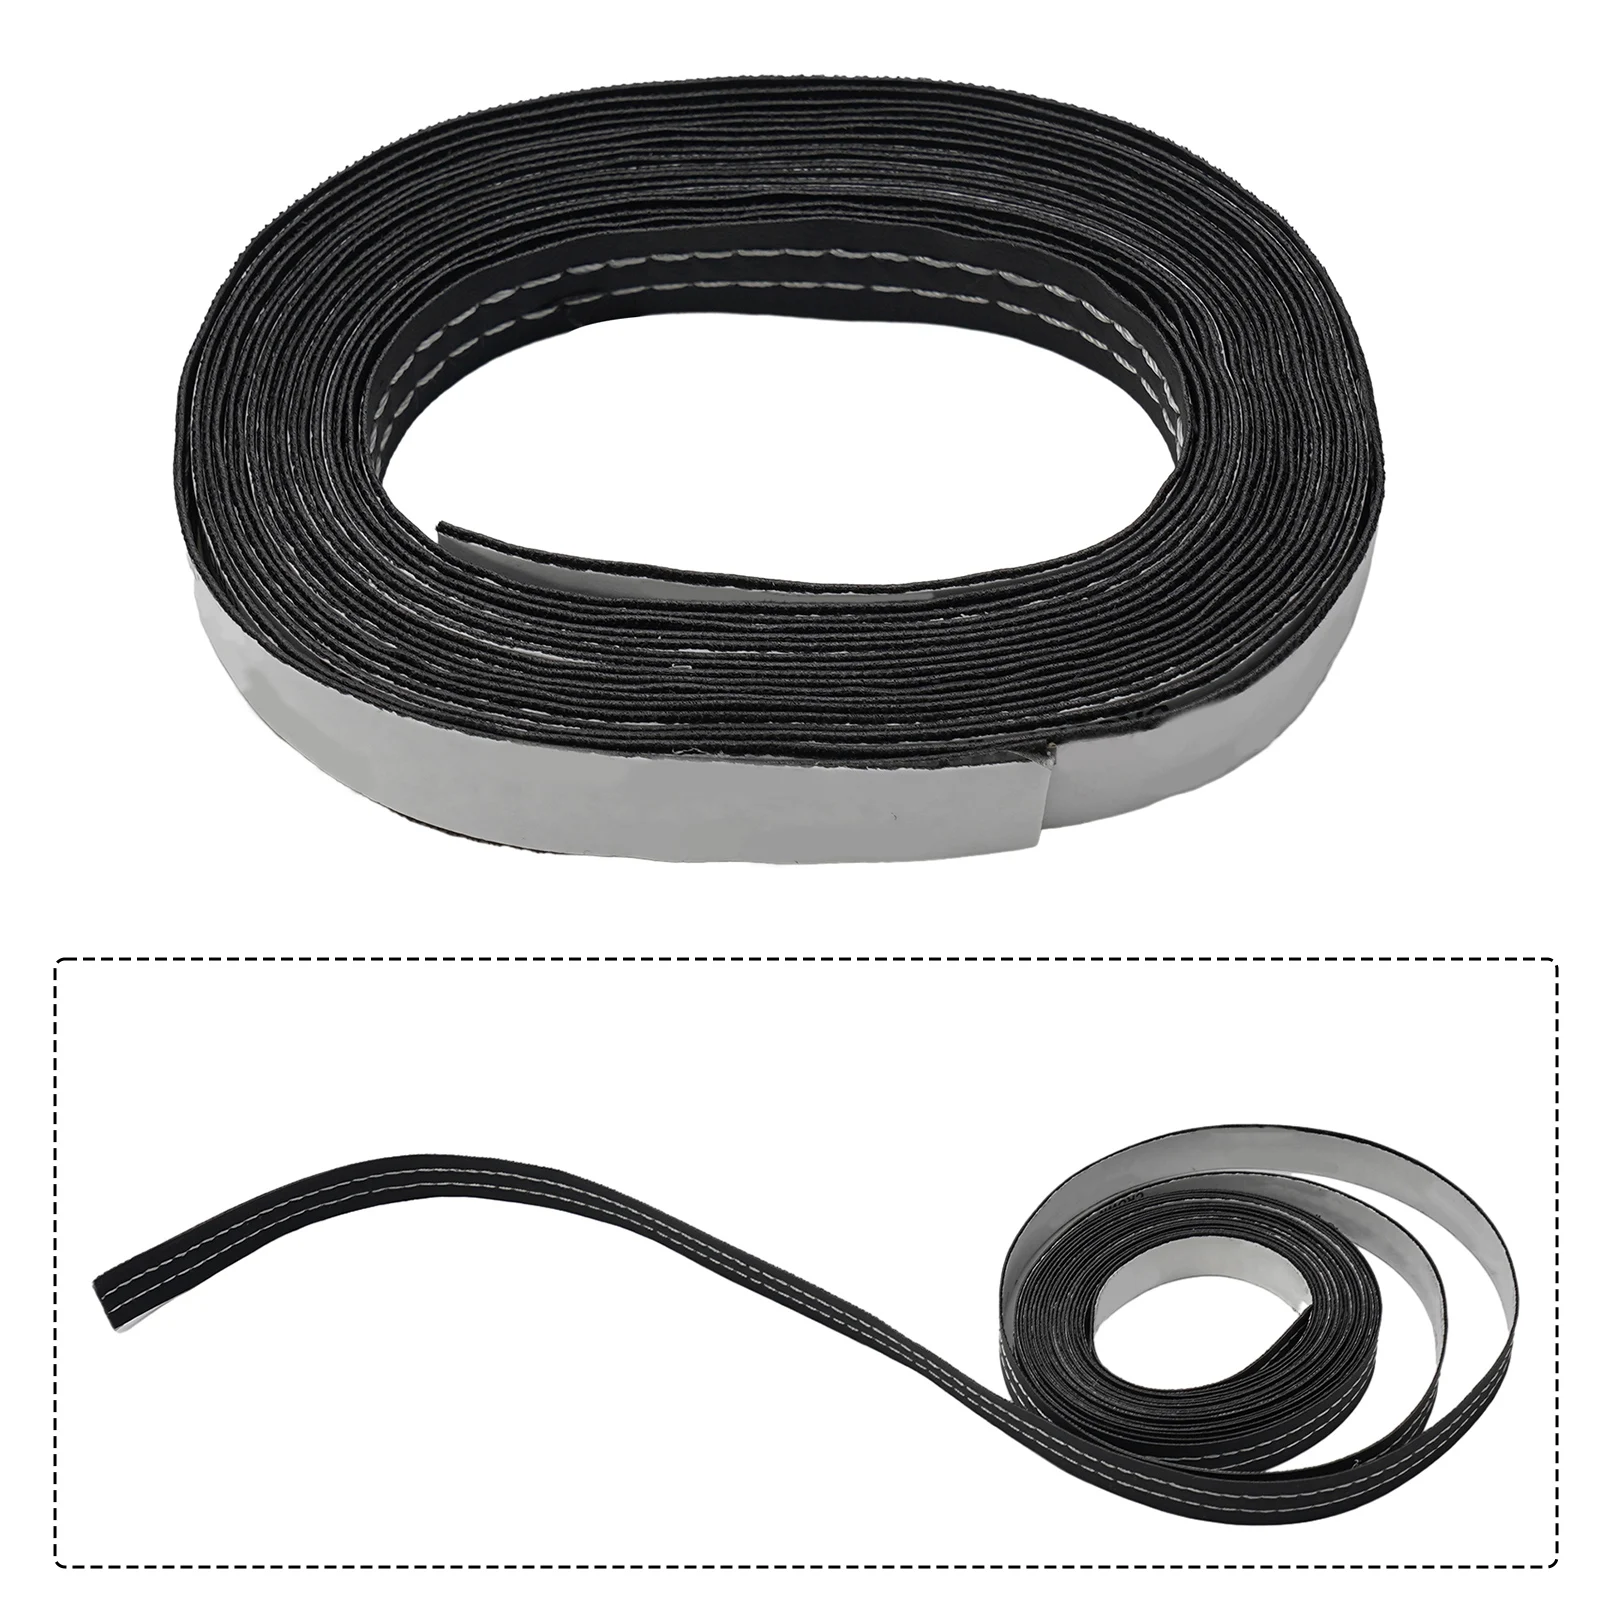 

Moulding Trim Strip 1.5CM Width 4M Length Black High Quality Leather Universal White Line Dashboard Direct Fit